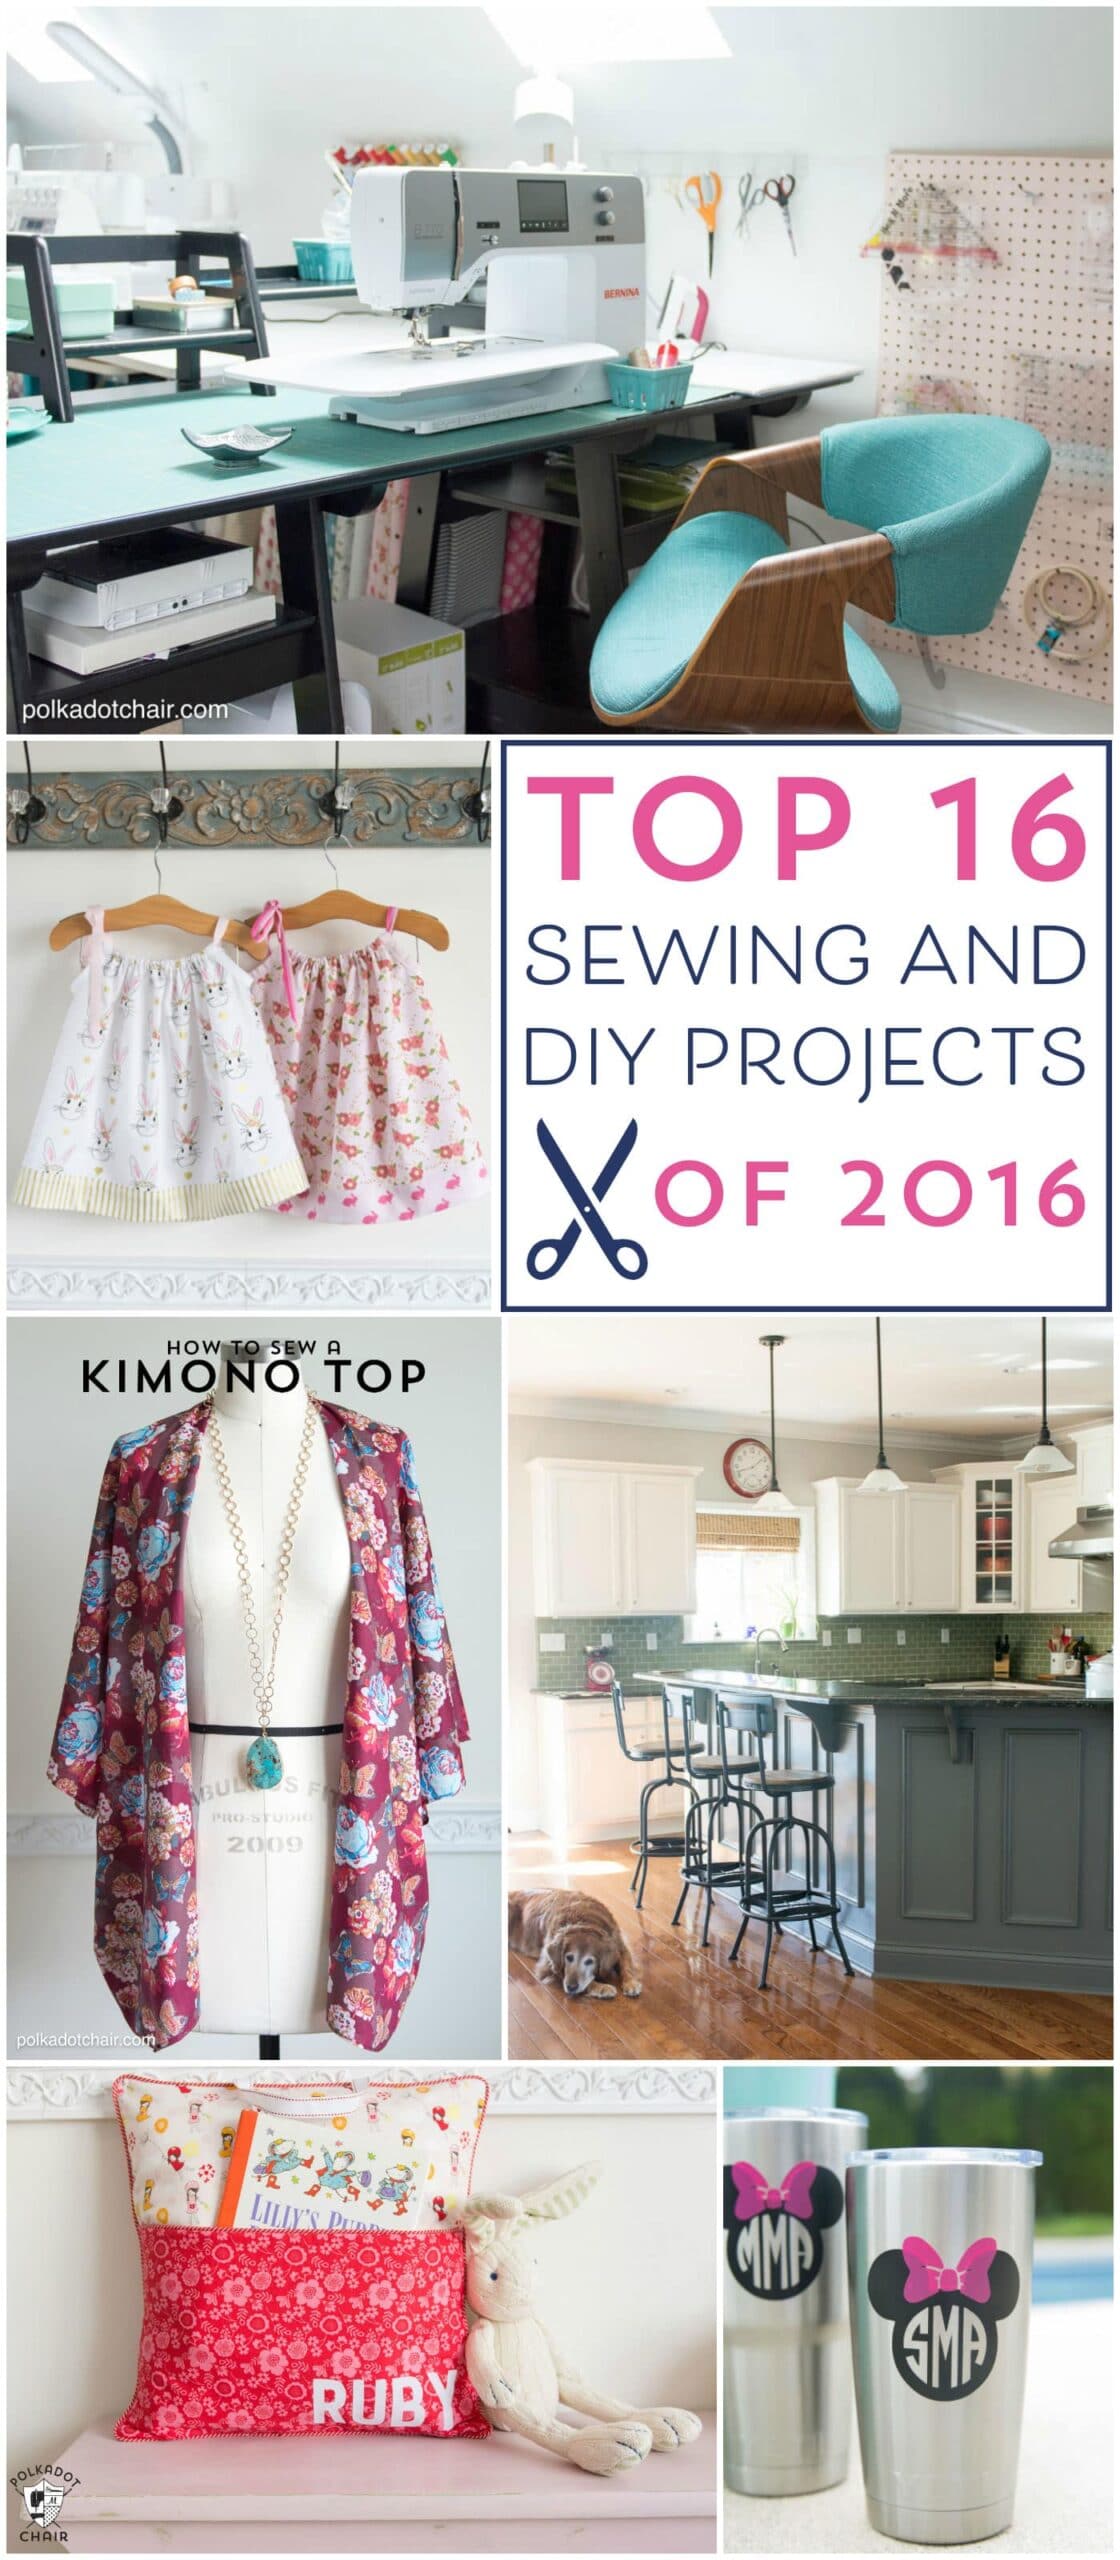 Top 16 Projects of 2016